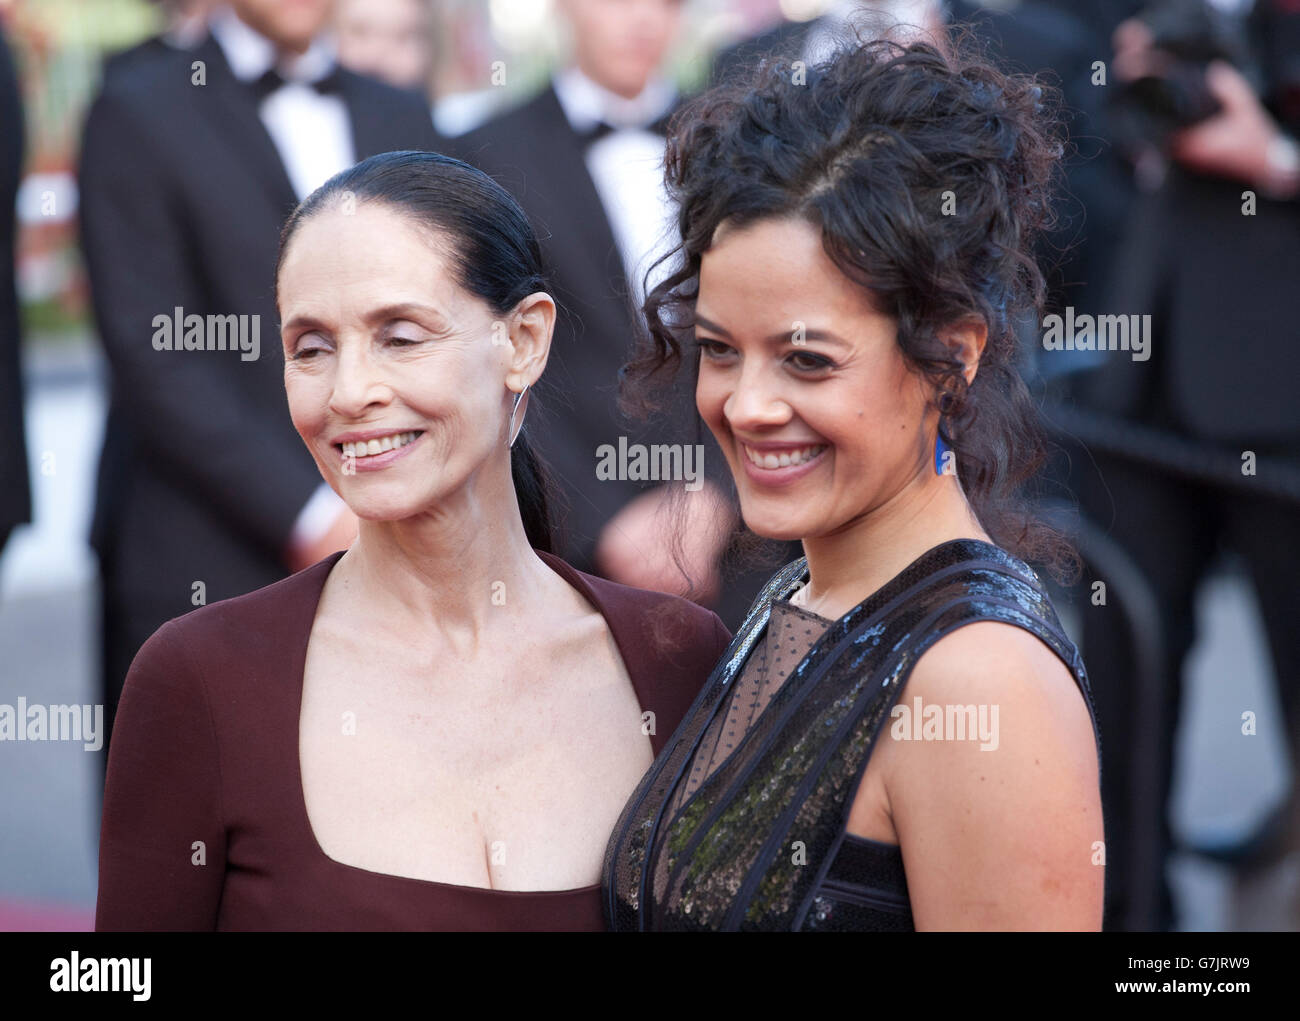 Actress Sonia Braga and Maeve Jinkings at the gala screening for the film Aquarius at the 69th Cannes Film Festival, 2016 Stock Photo